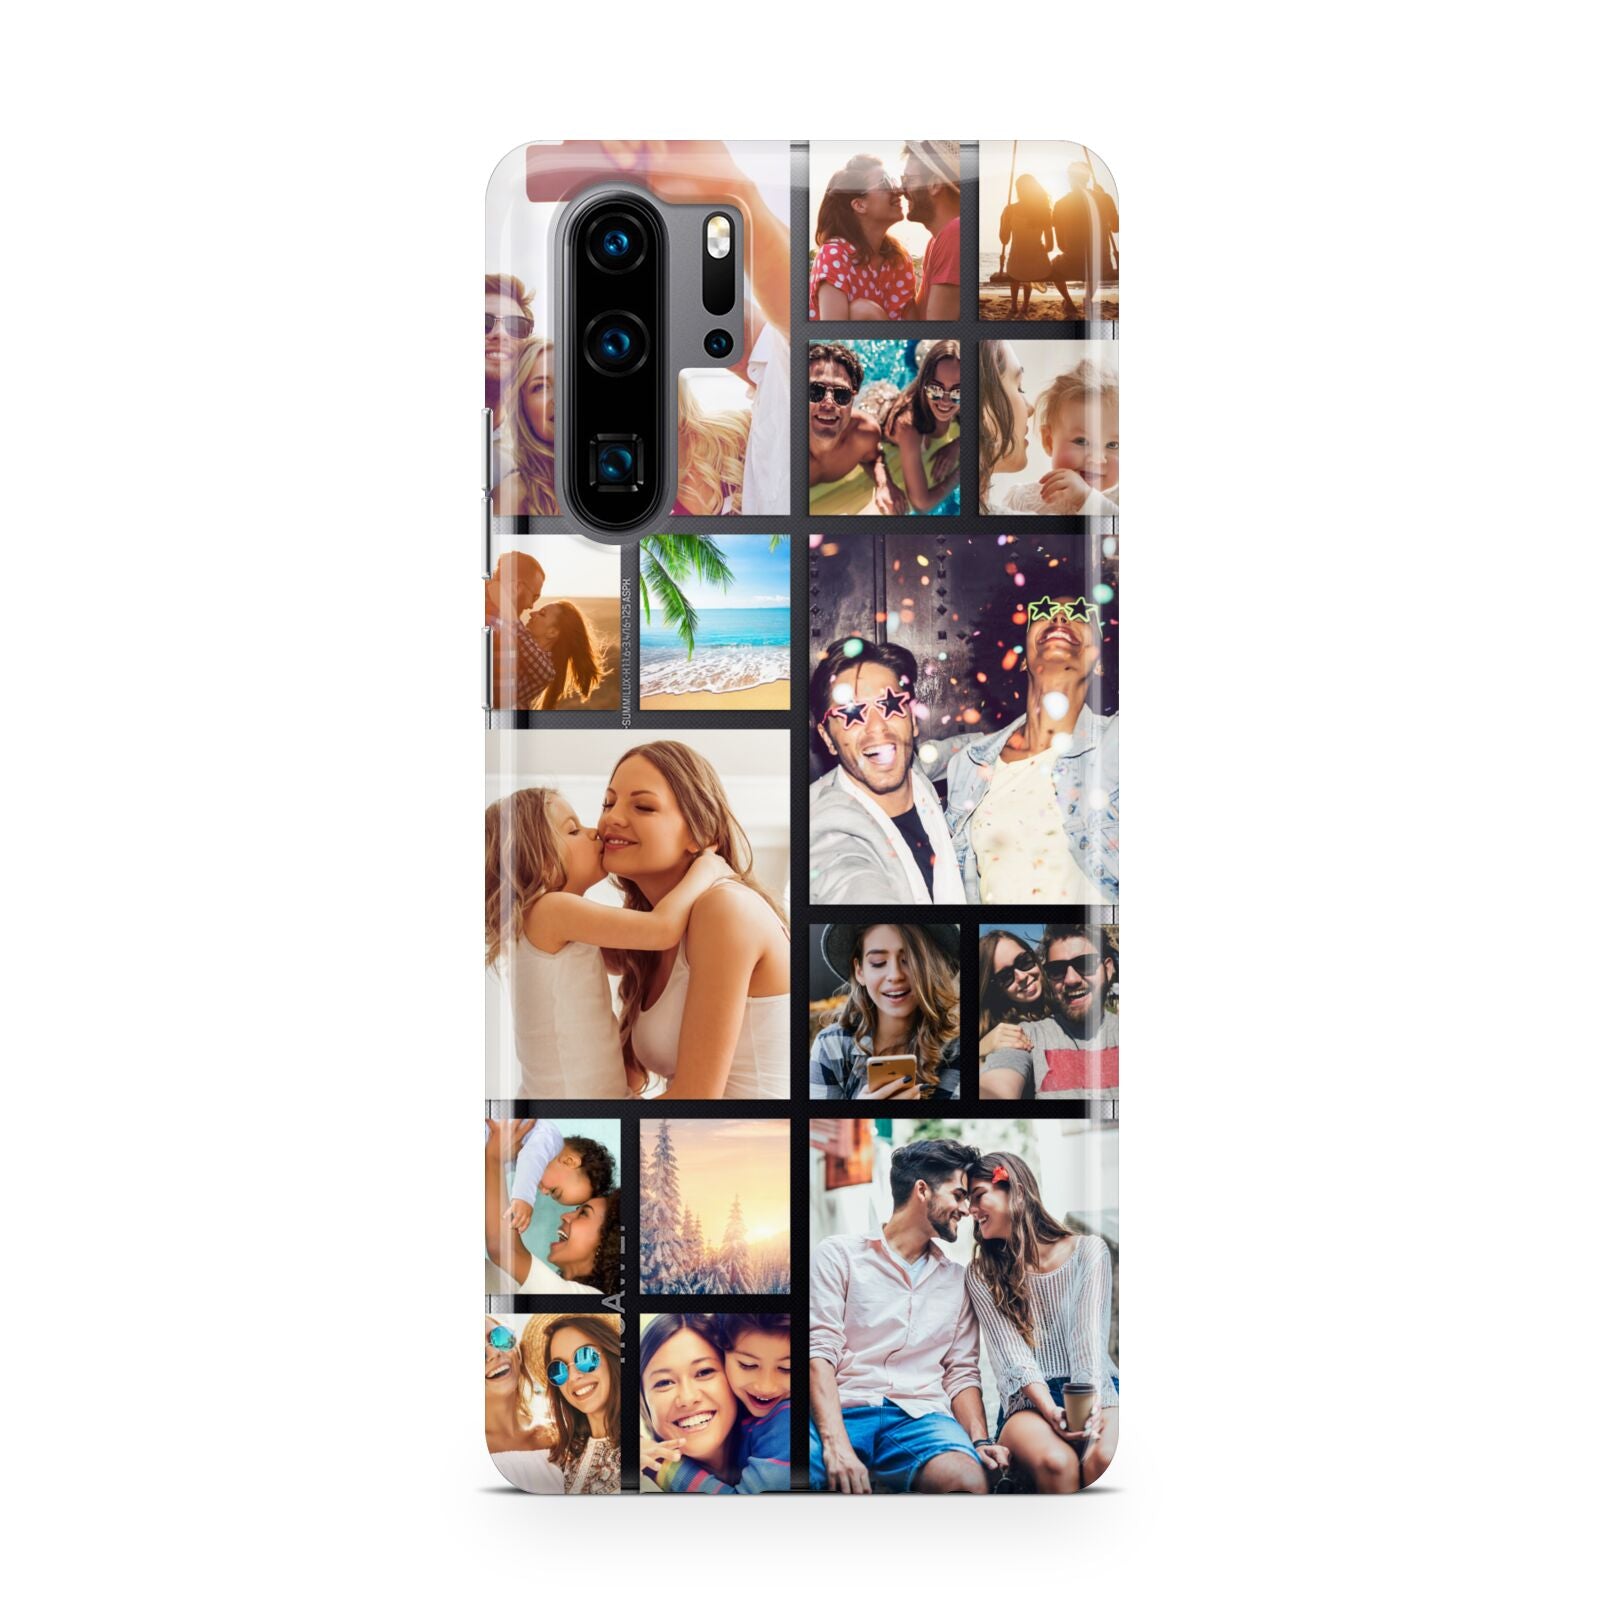 Abstract Multi Tile Photo Montage Upload Huawei P30 Pro Phone Case